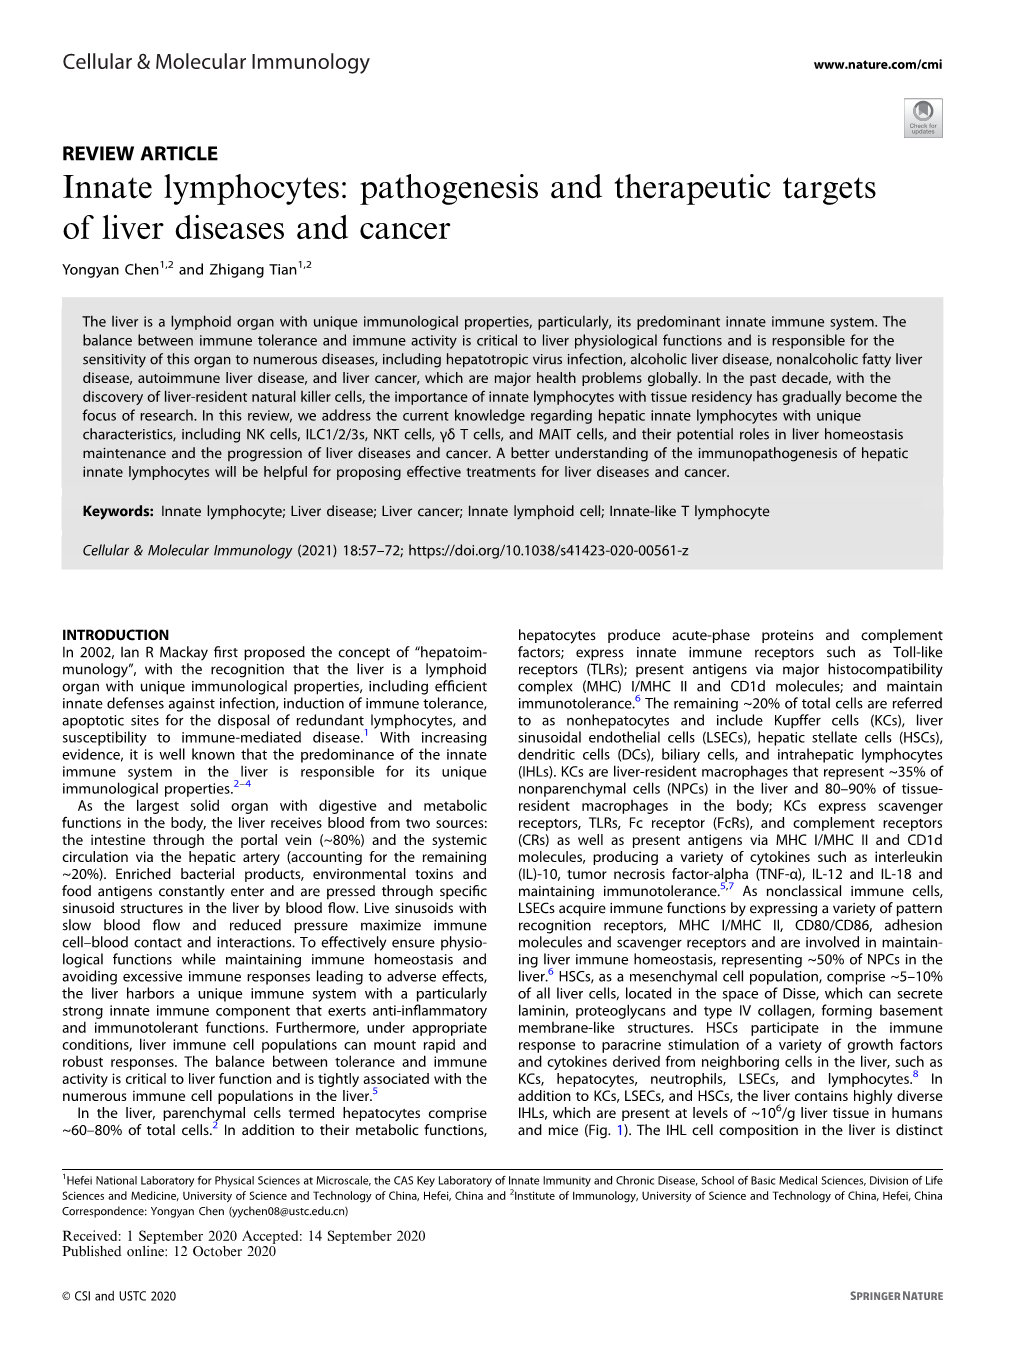 Pathogenesis and Therapeutic Targets of Liver Diseases and Cancer